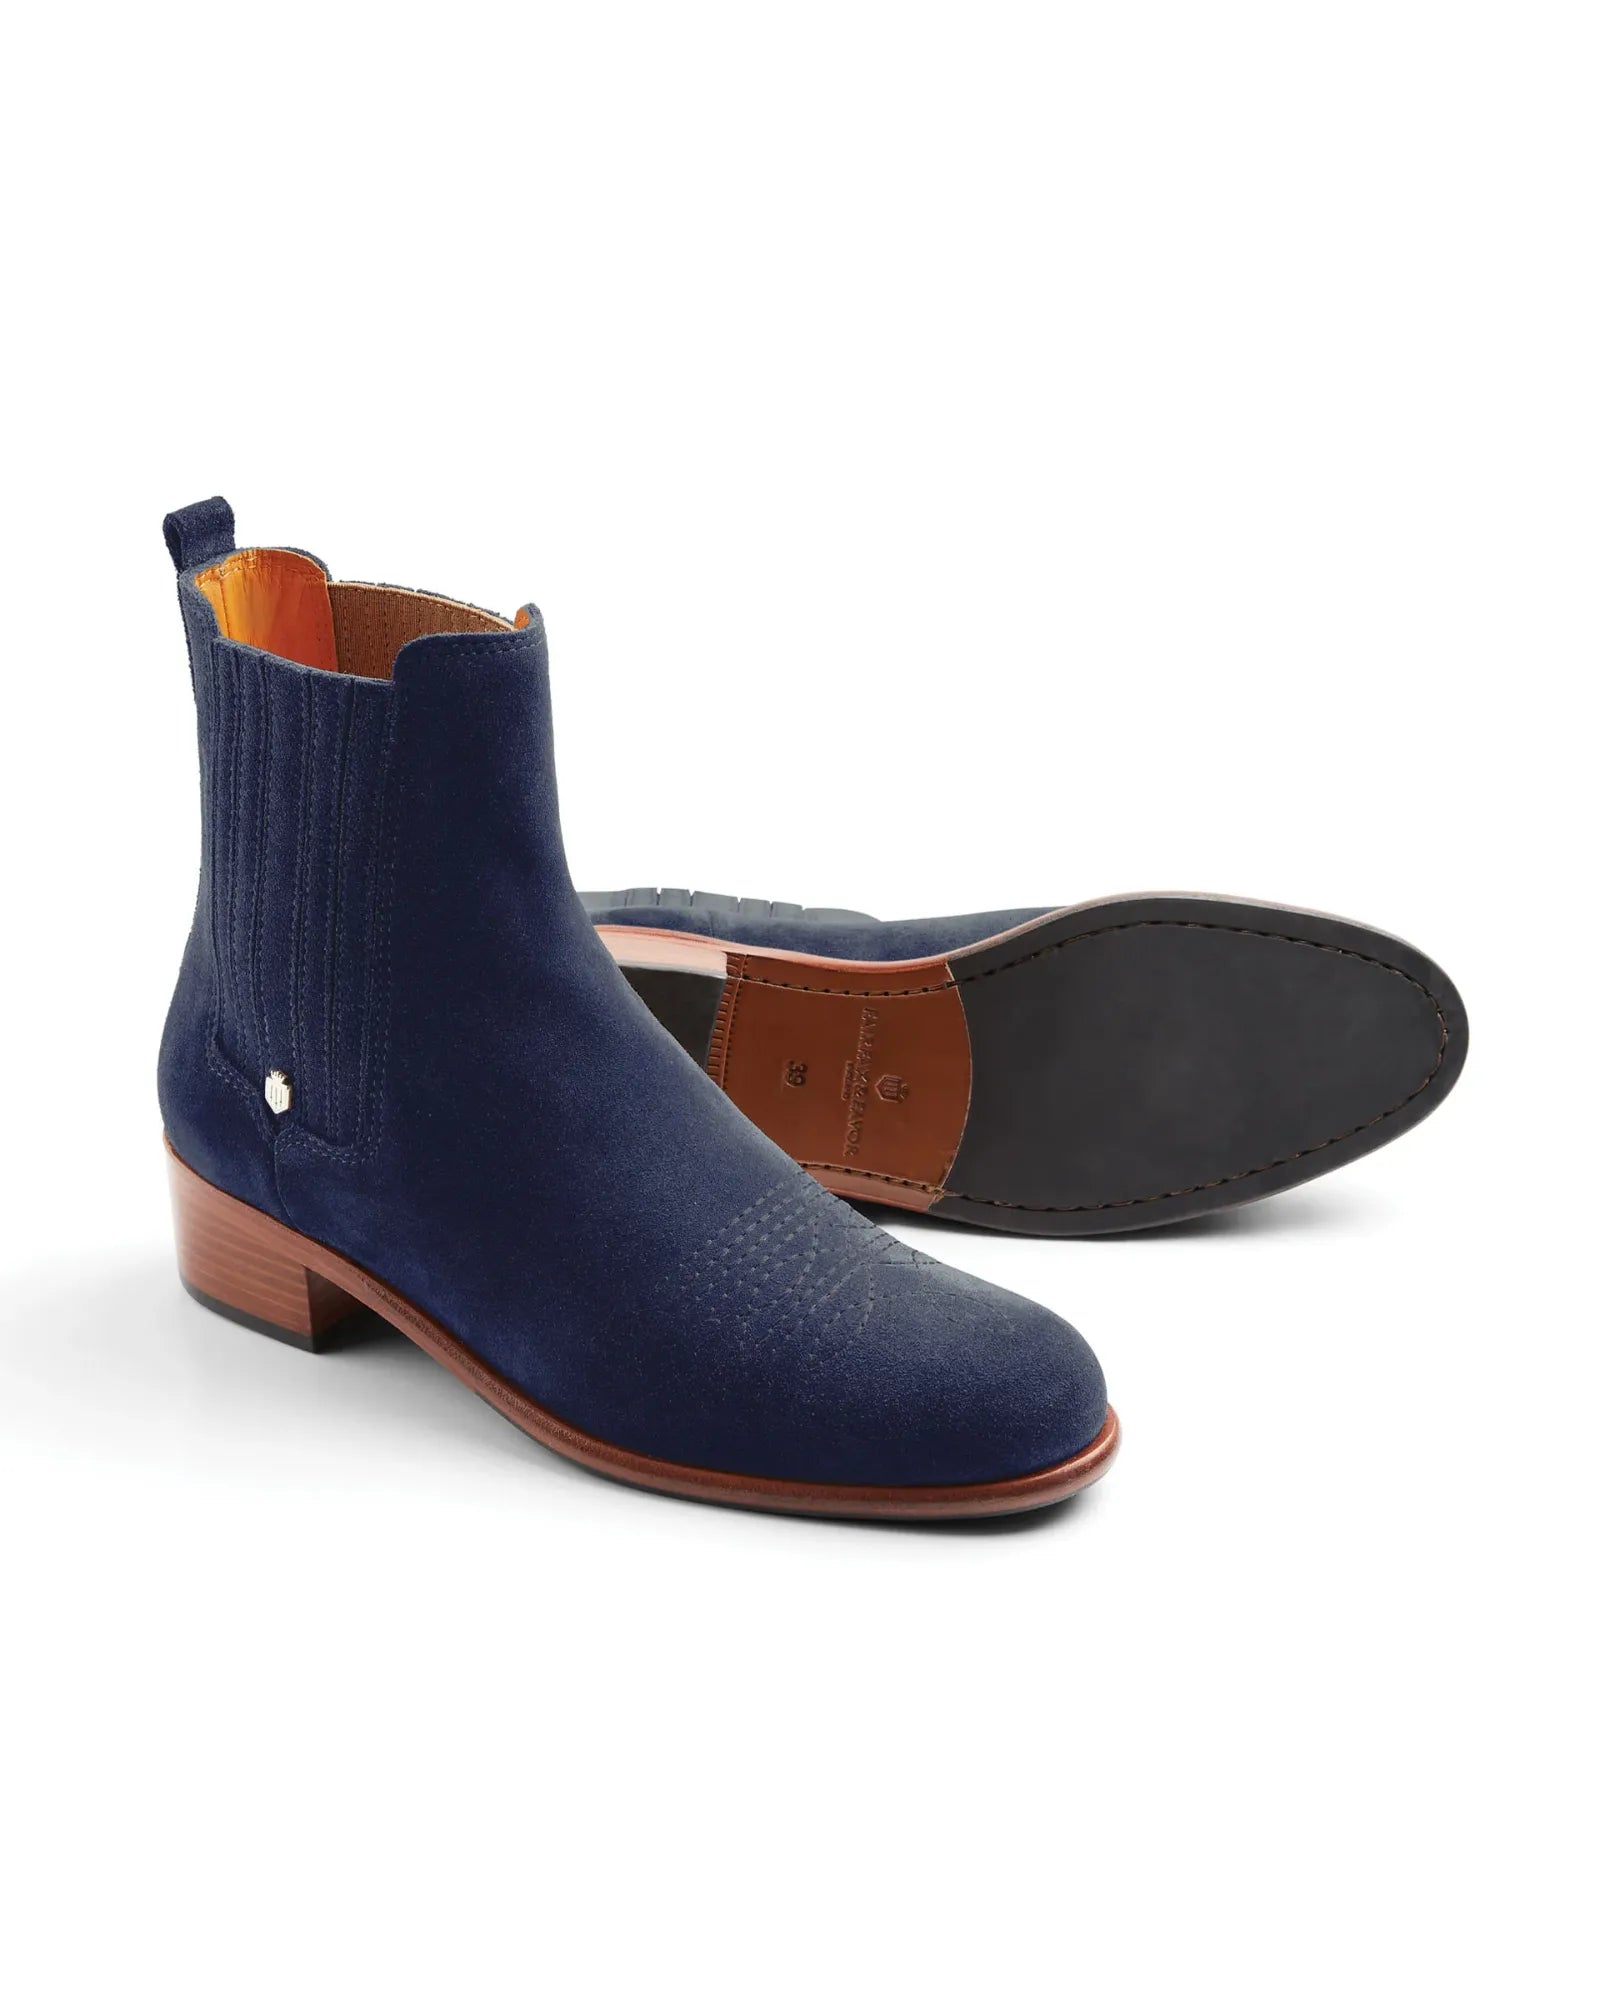 The Rockingham Chelsea Boot in Ink Suede